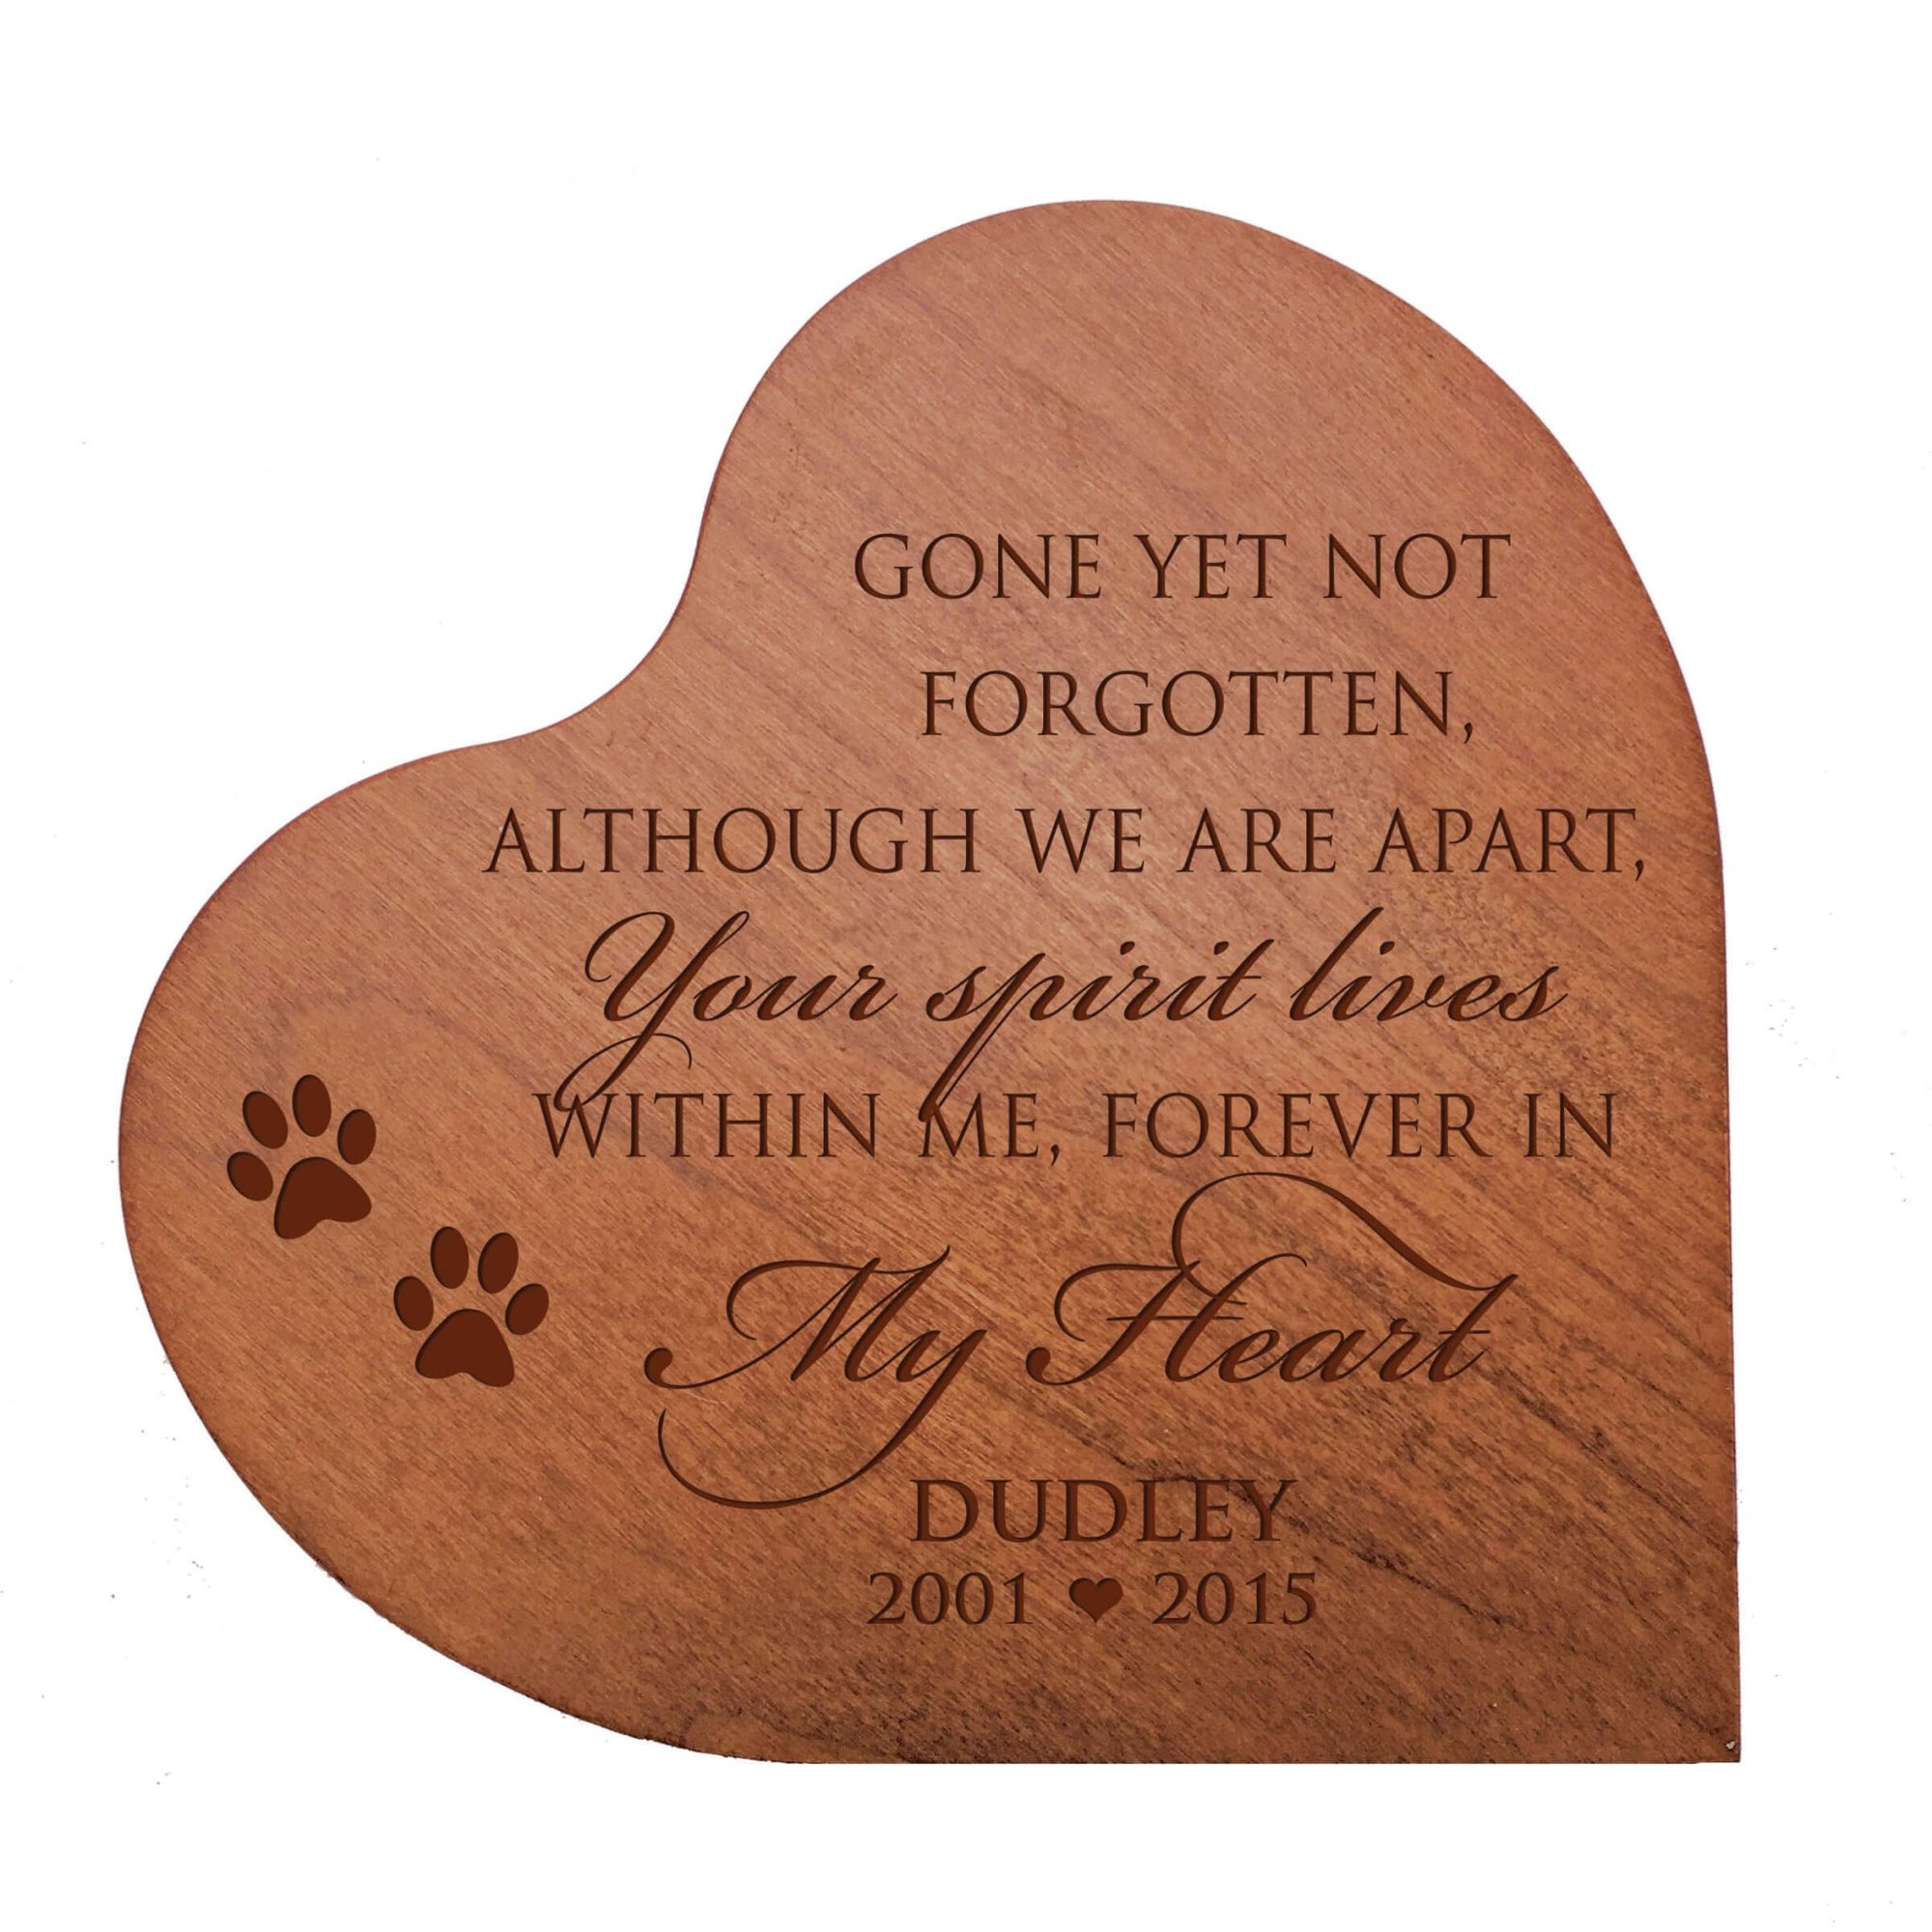 Personalized Small Heart Cremation Urn Keepsake For Pet Ashes - Gone Yet Not Forgotten - LifeSong Milestones